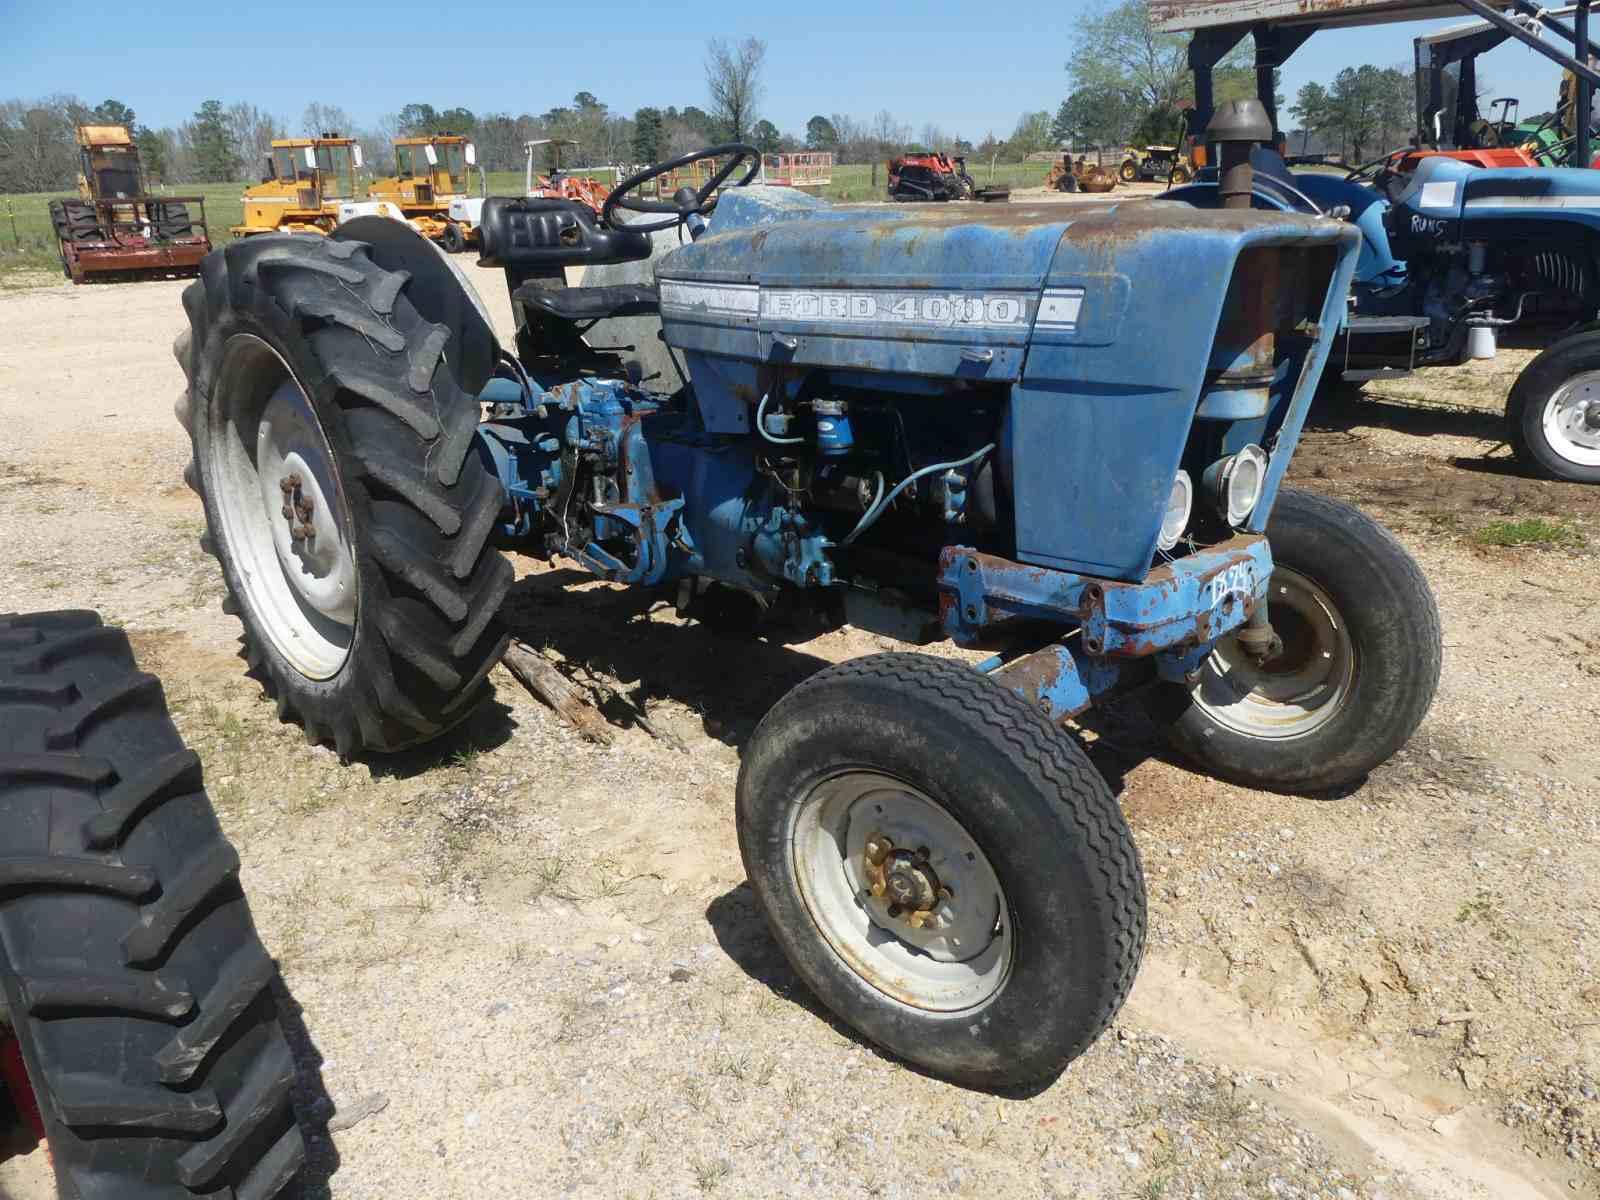 Ford 4000 Tractor (Salvage): Meter Shows 6224 hrs